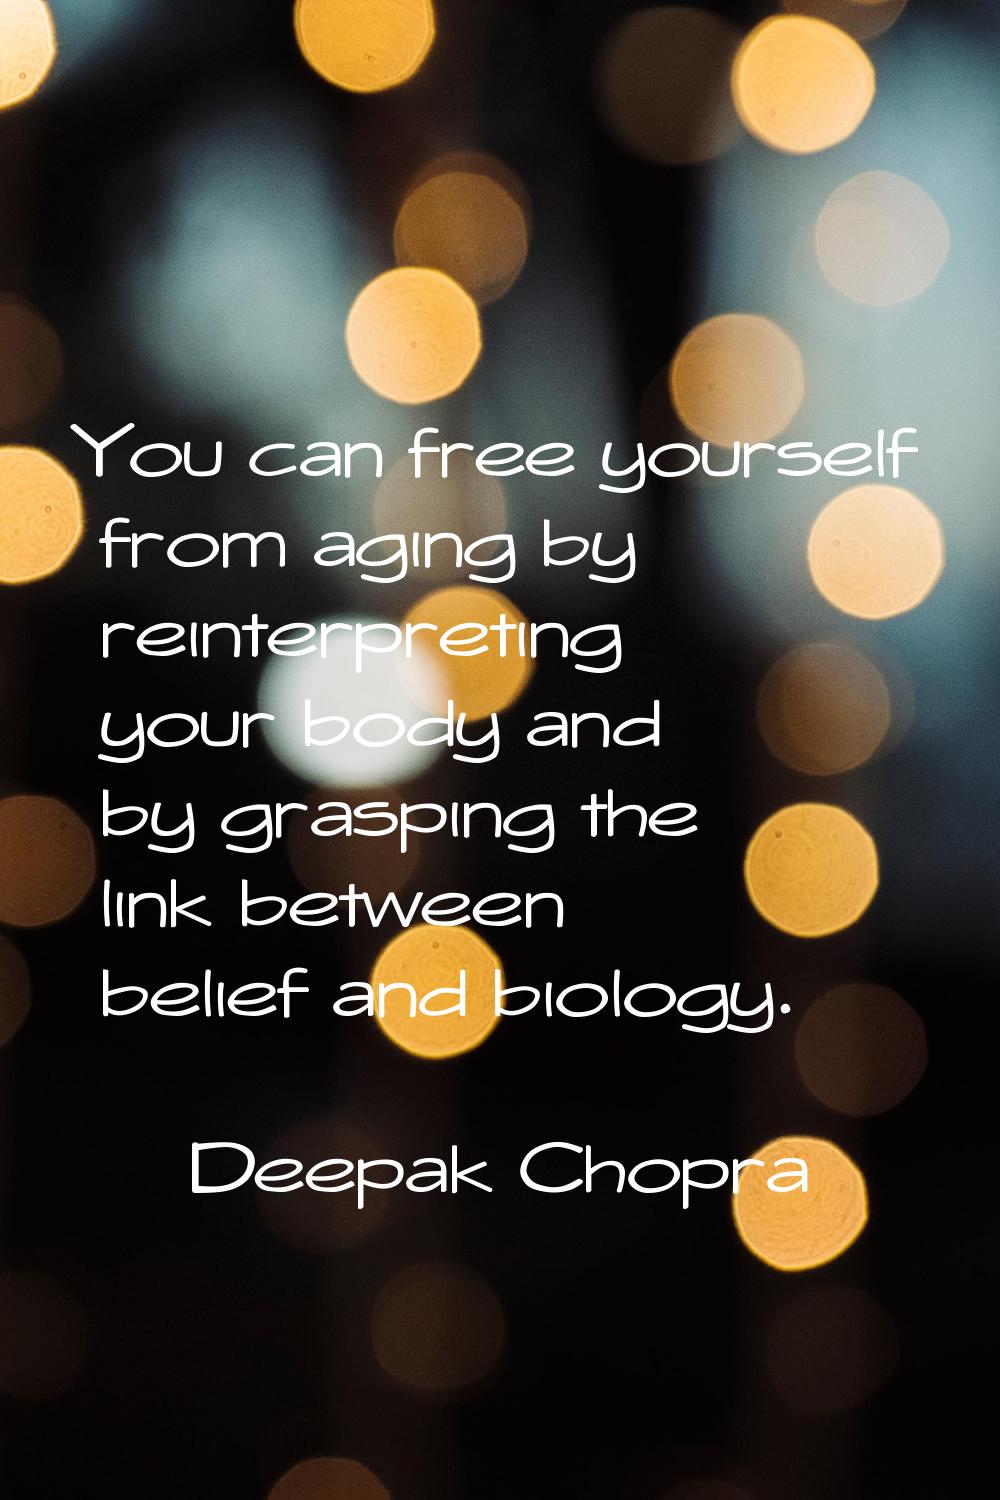 You can free yourself from aging by reinterpreting your body and by grasping the link between belie